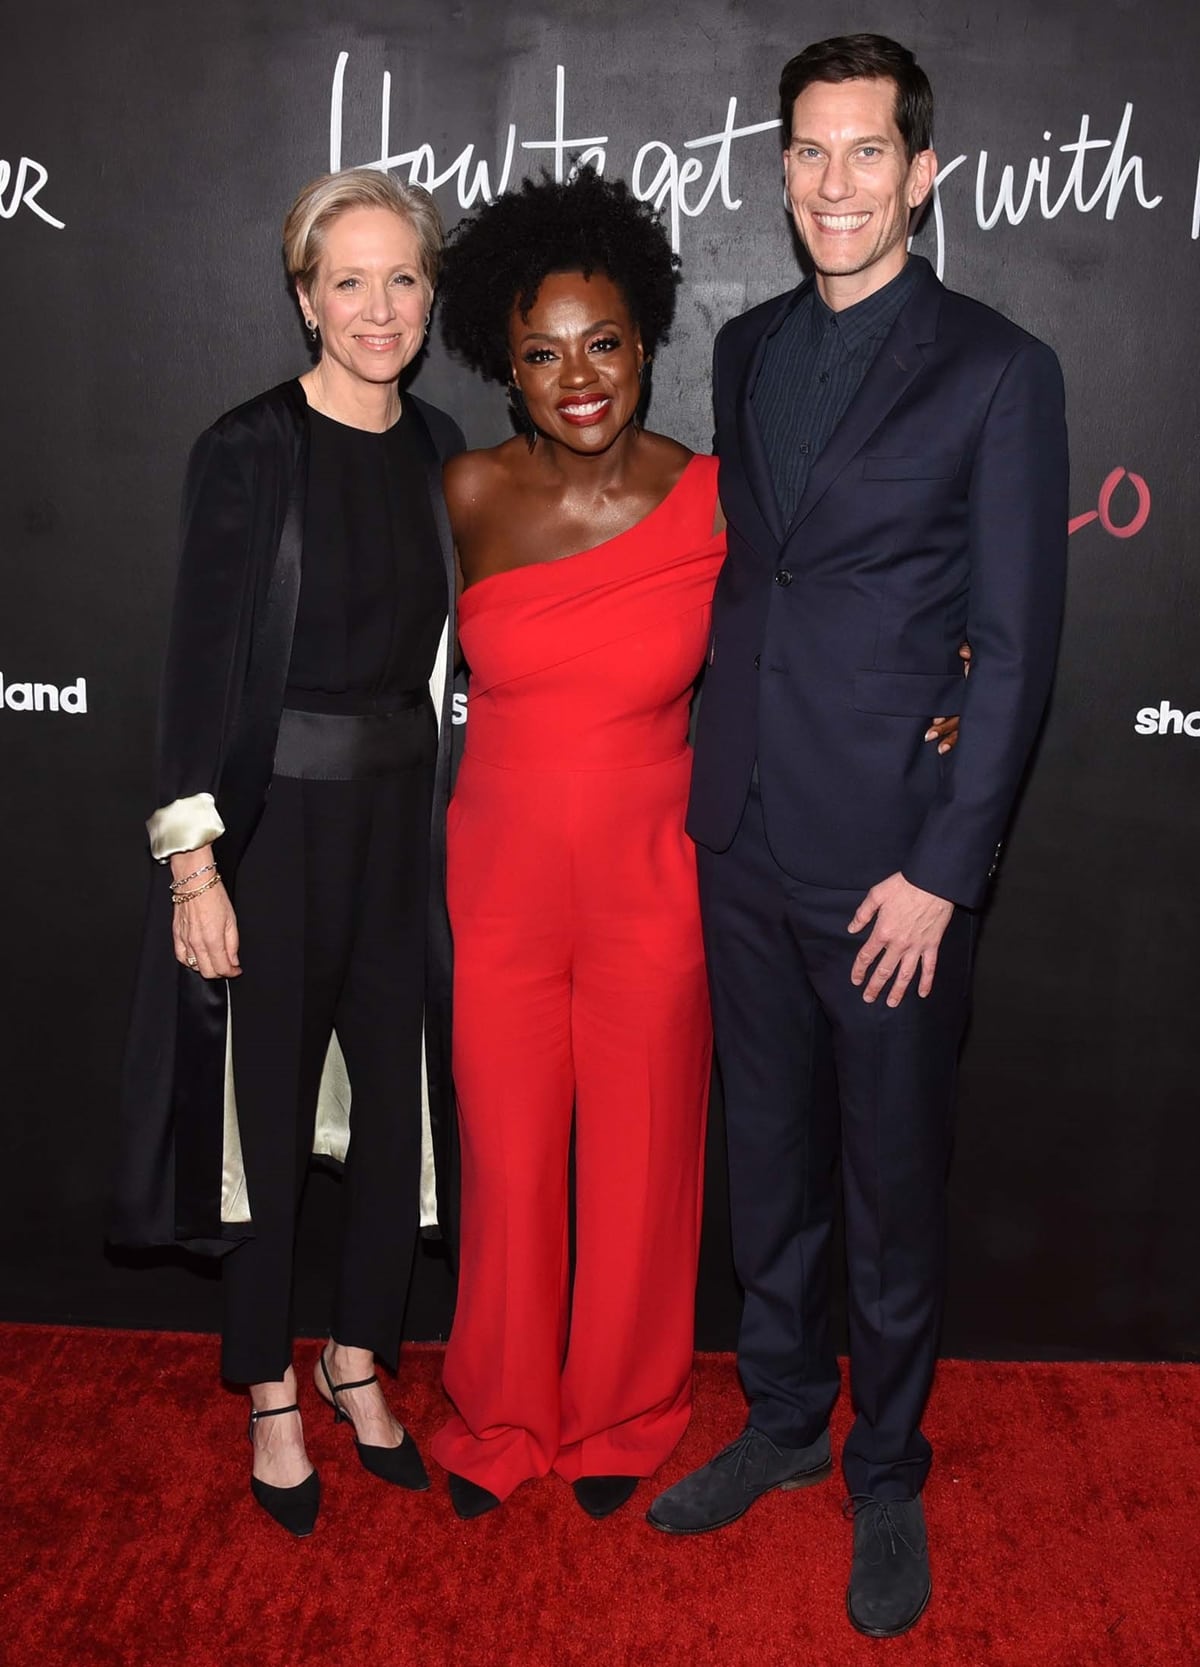 Betsy Beers, Viola Davis, and Pete Nowalk worked together on How to Get Away with Murder, which was a critically acclaimed and commercially successful show that ran for six seasons